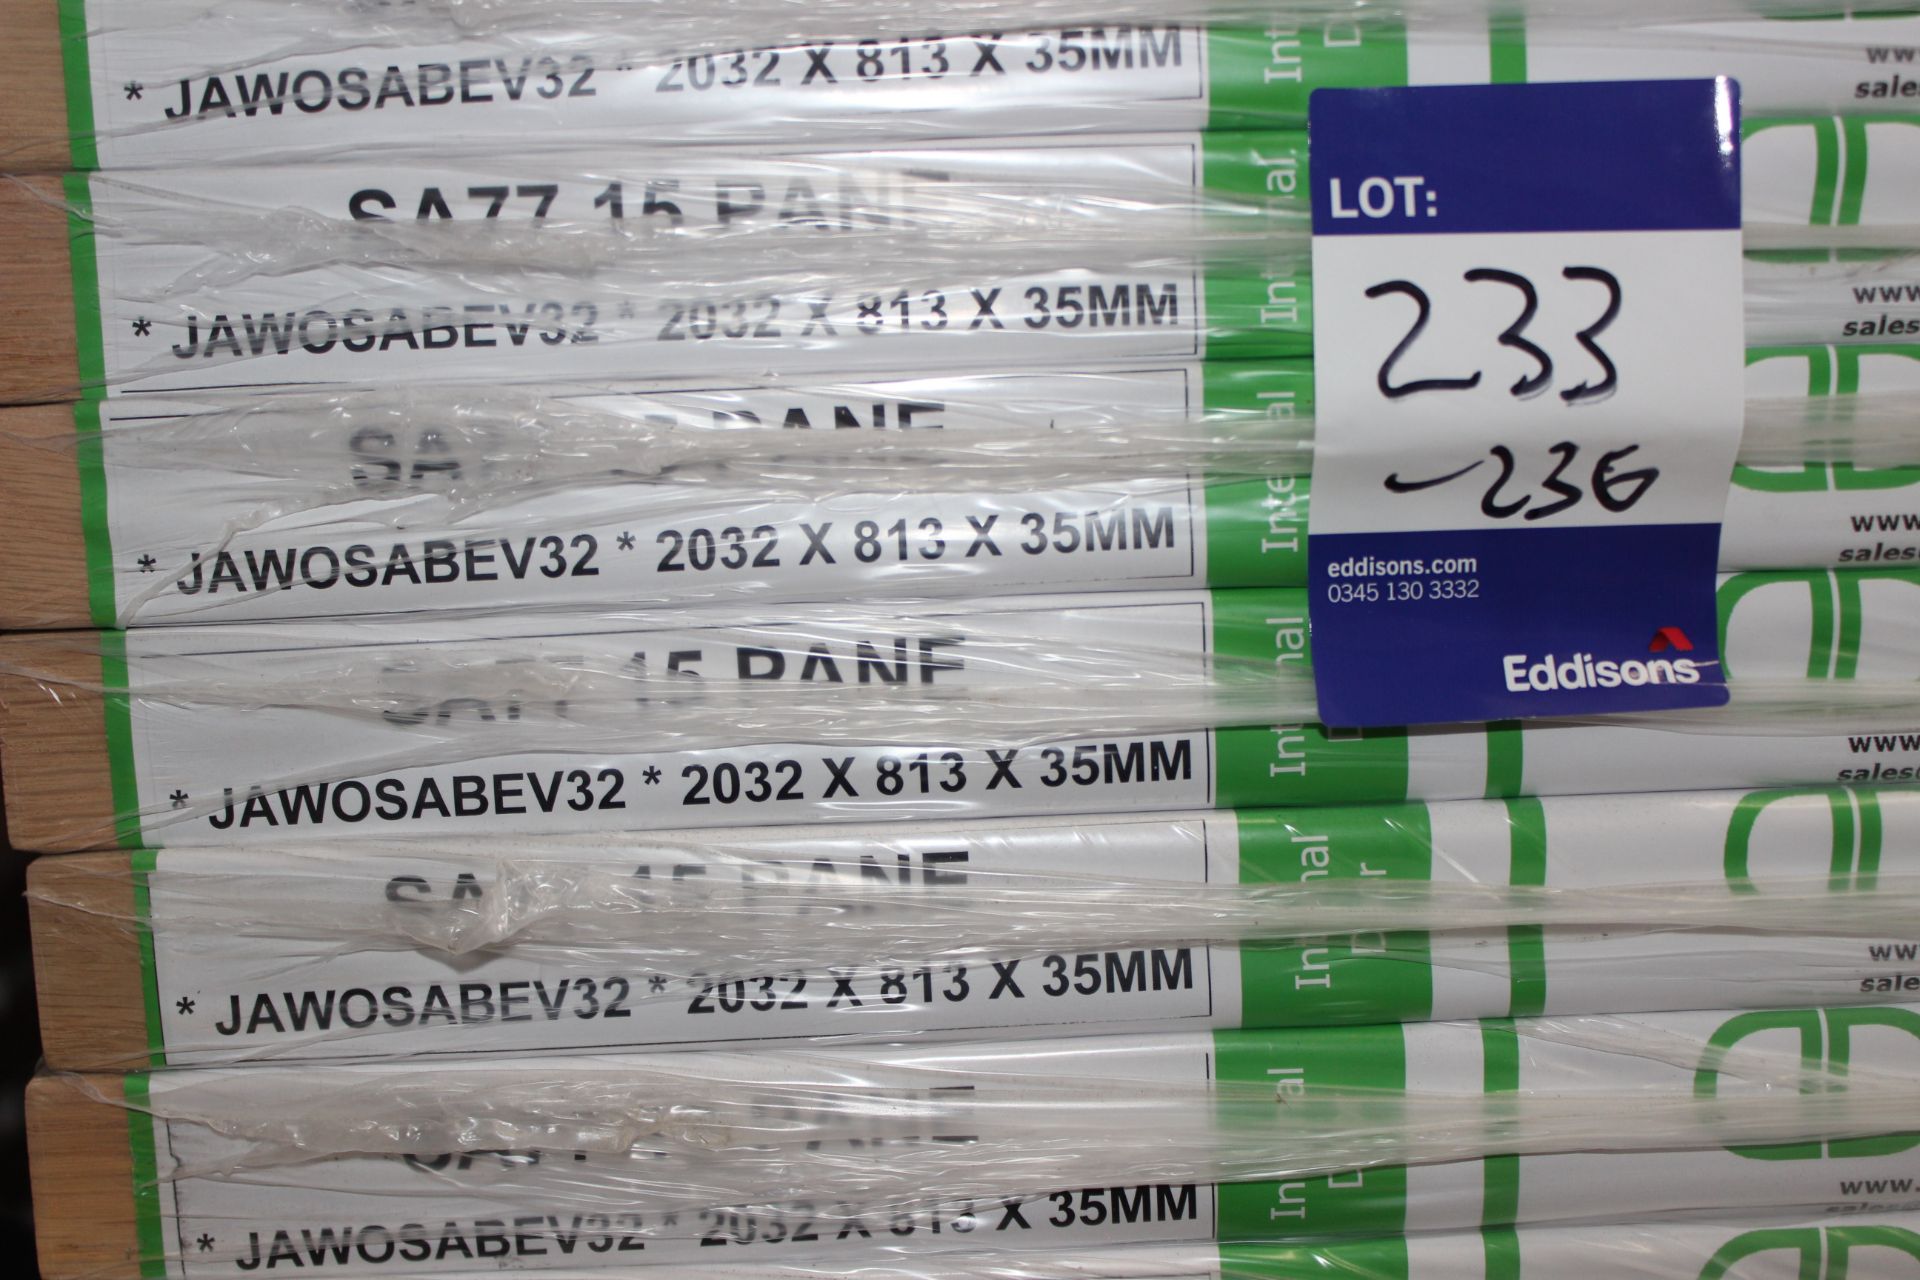 5 x SA77 15 Pane Internal, JAWOSABEB32, 2032mm x 813mm x 35mm- Lots to be handed out in order they - Image 3 of 3